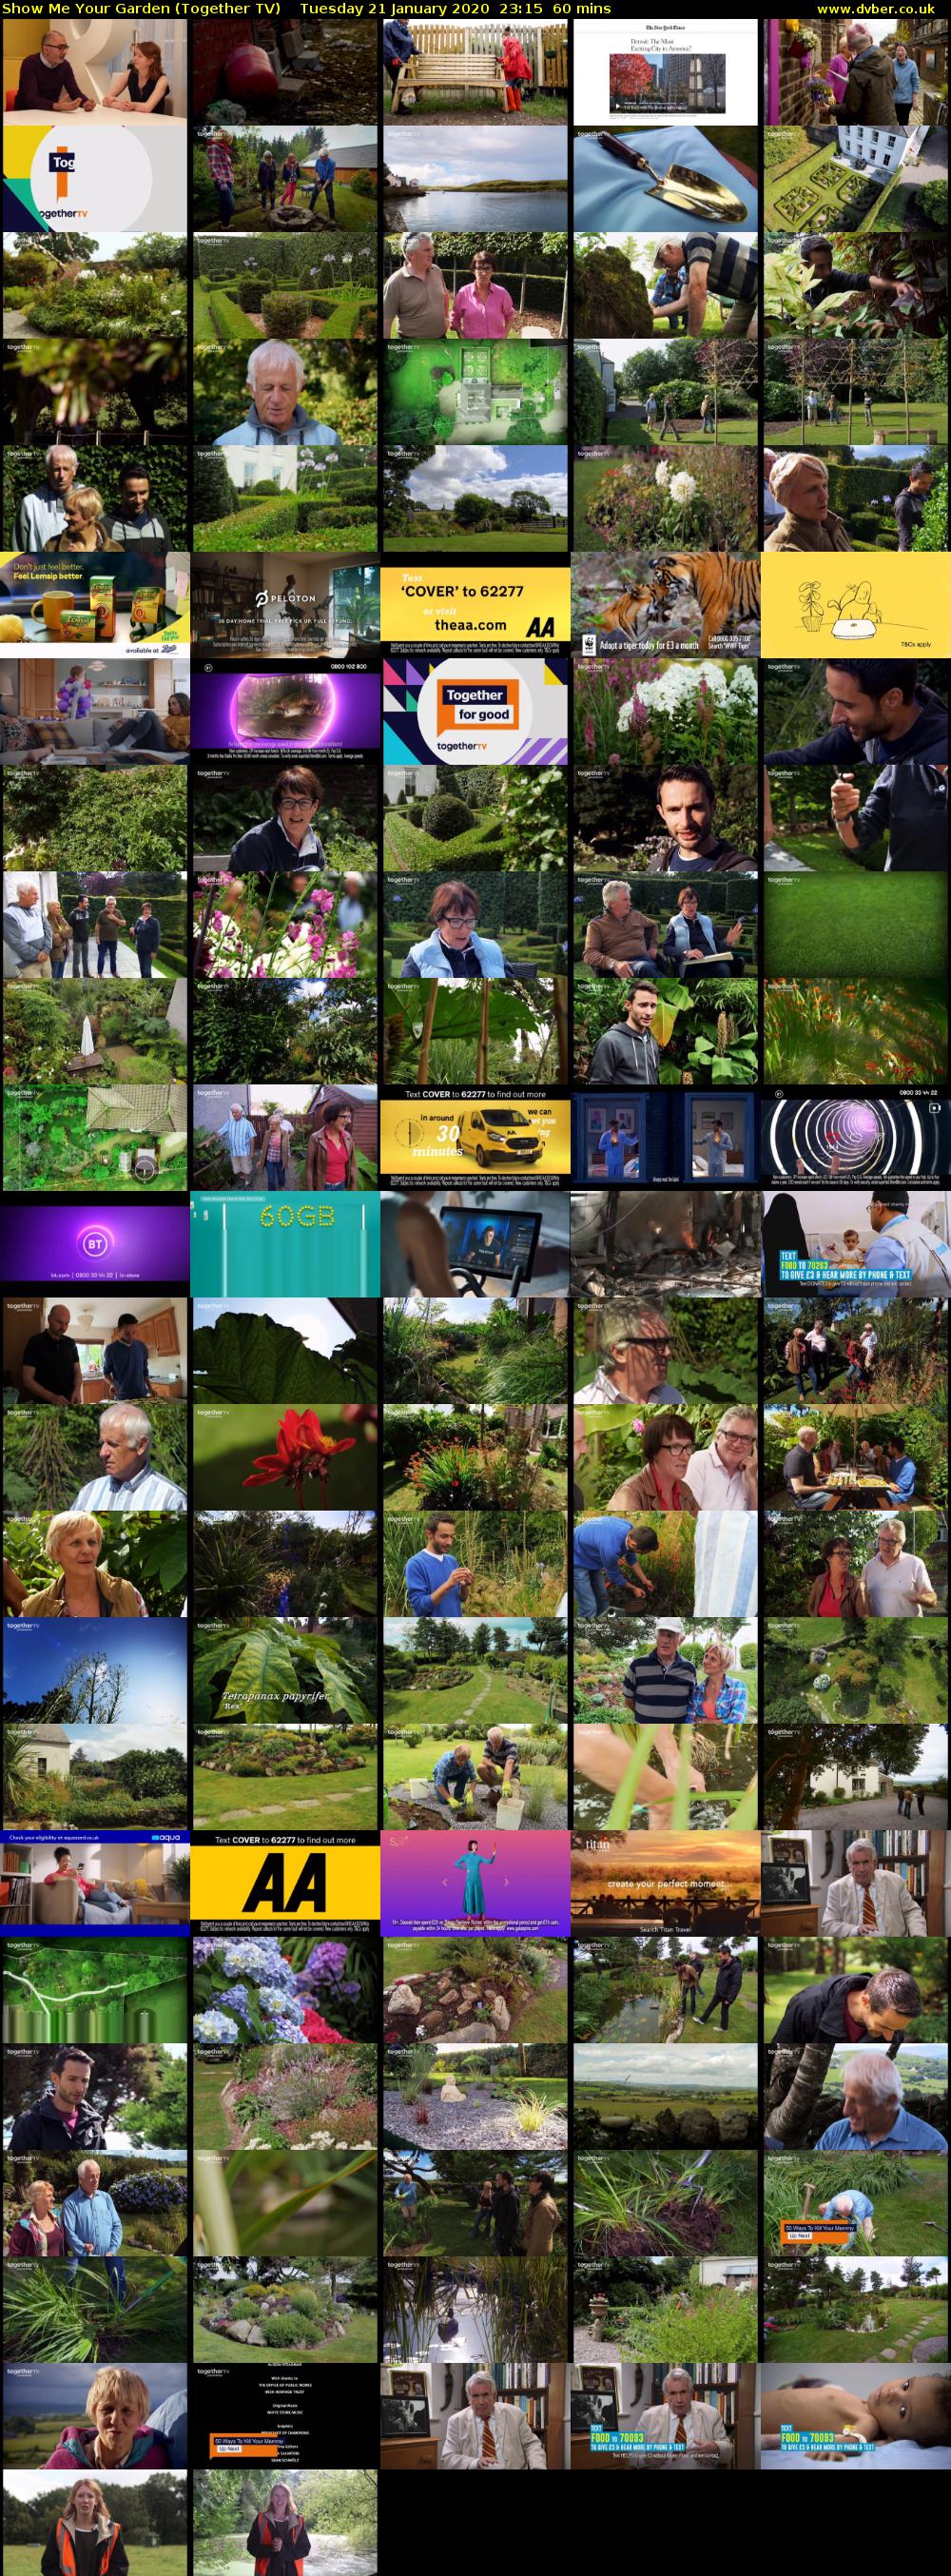 Show Me Your Garden (Together TV) Tuesday 21 January 2020 23:15 - 00:15